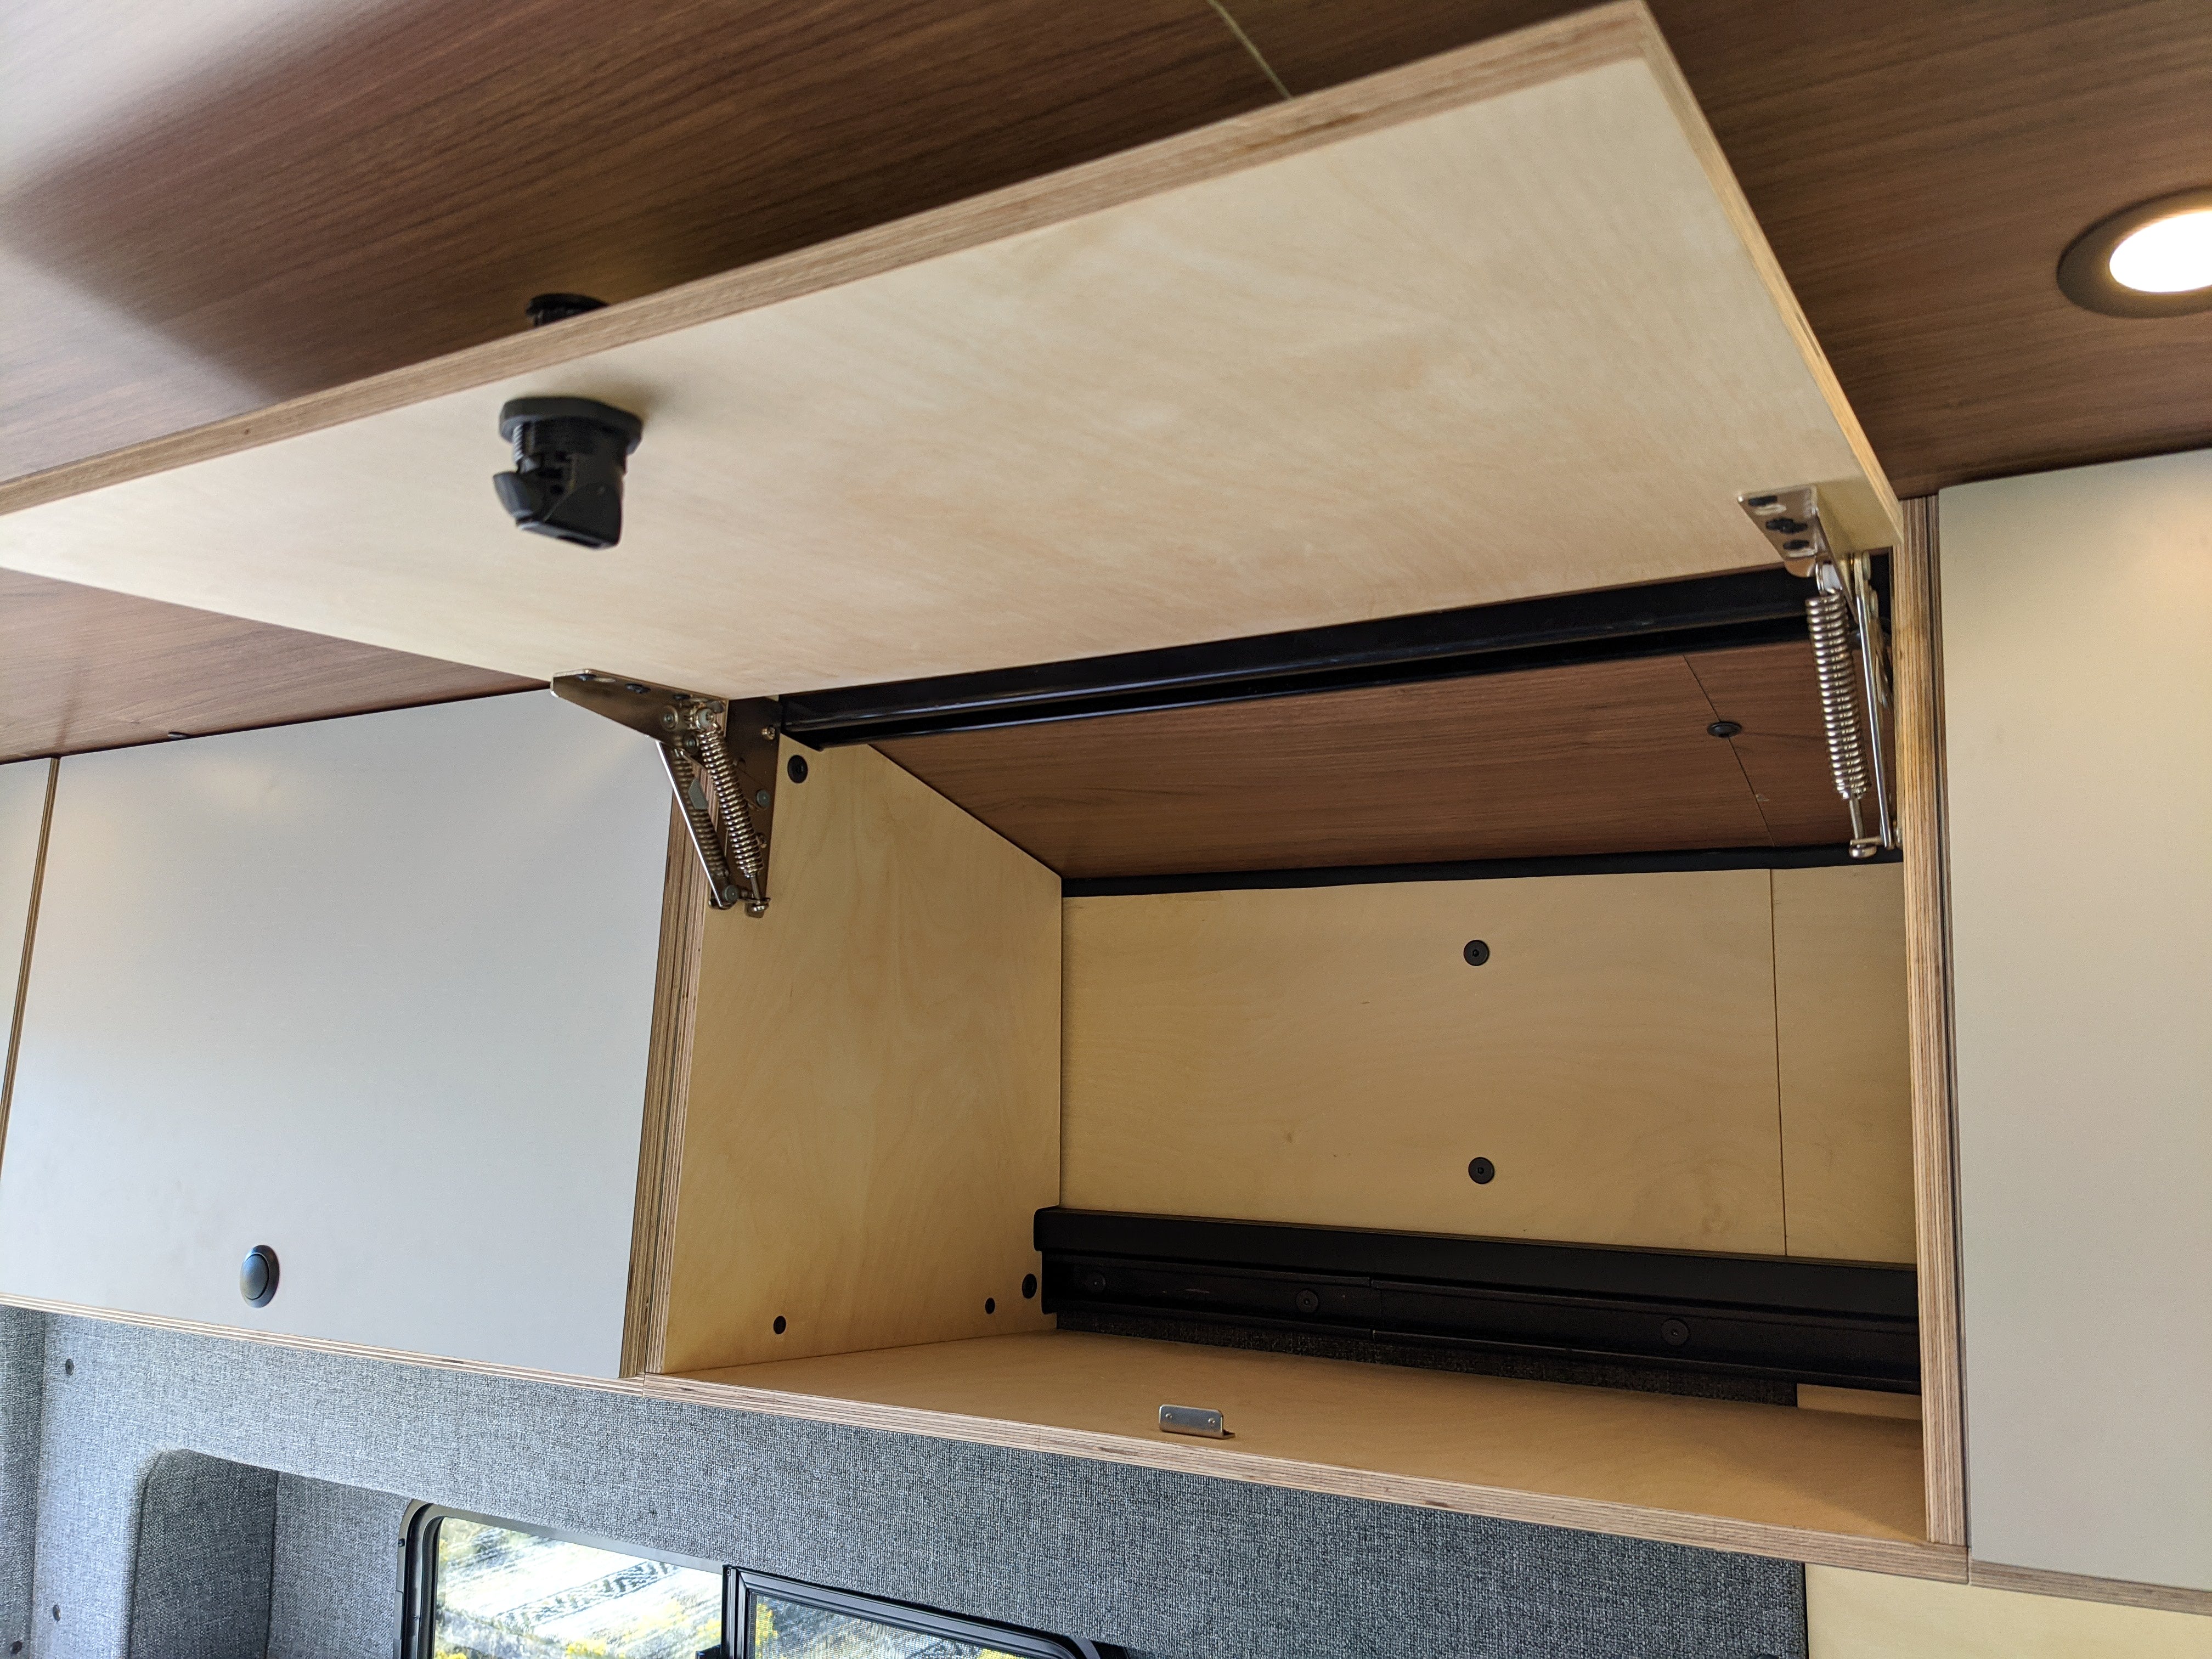 Upper Cabinets (2 x 25